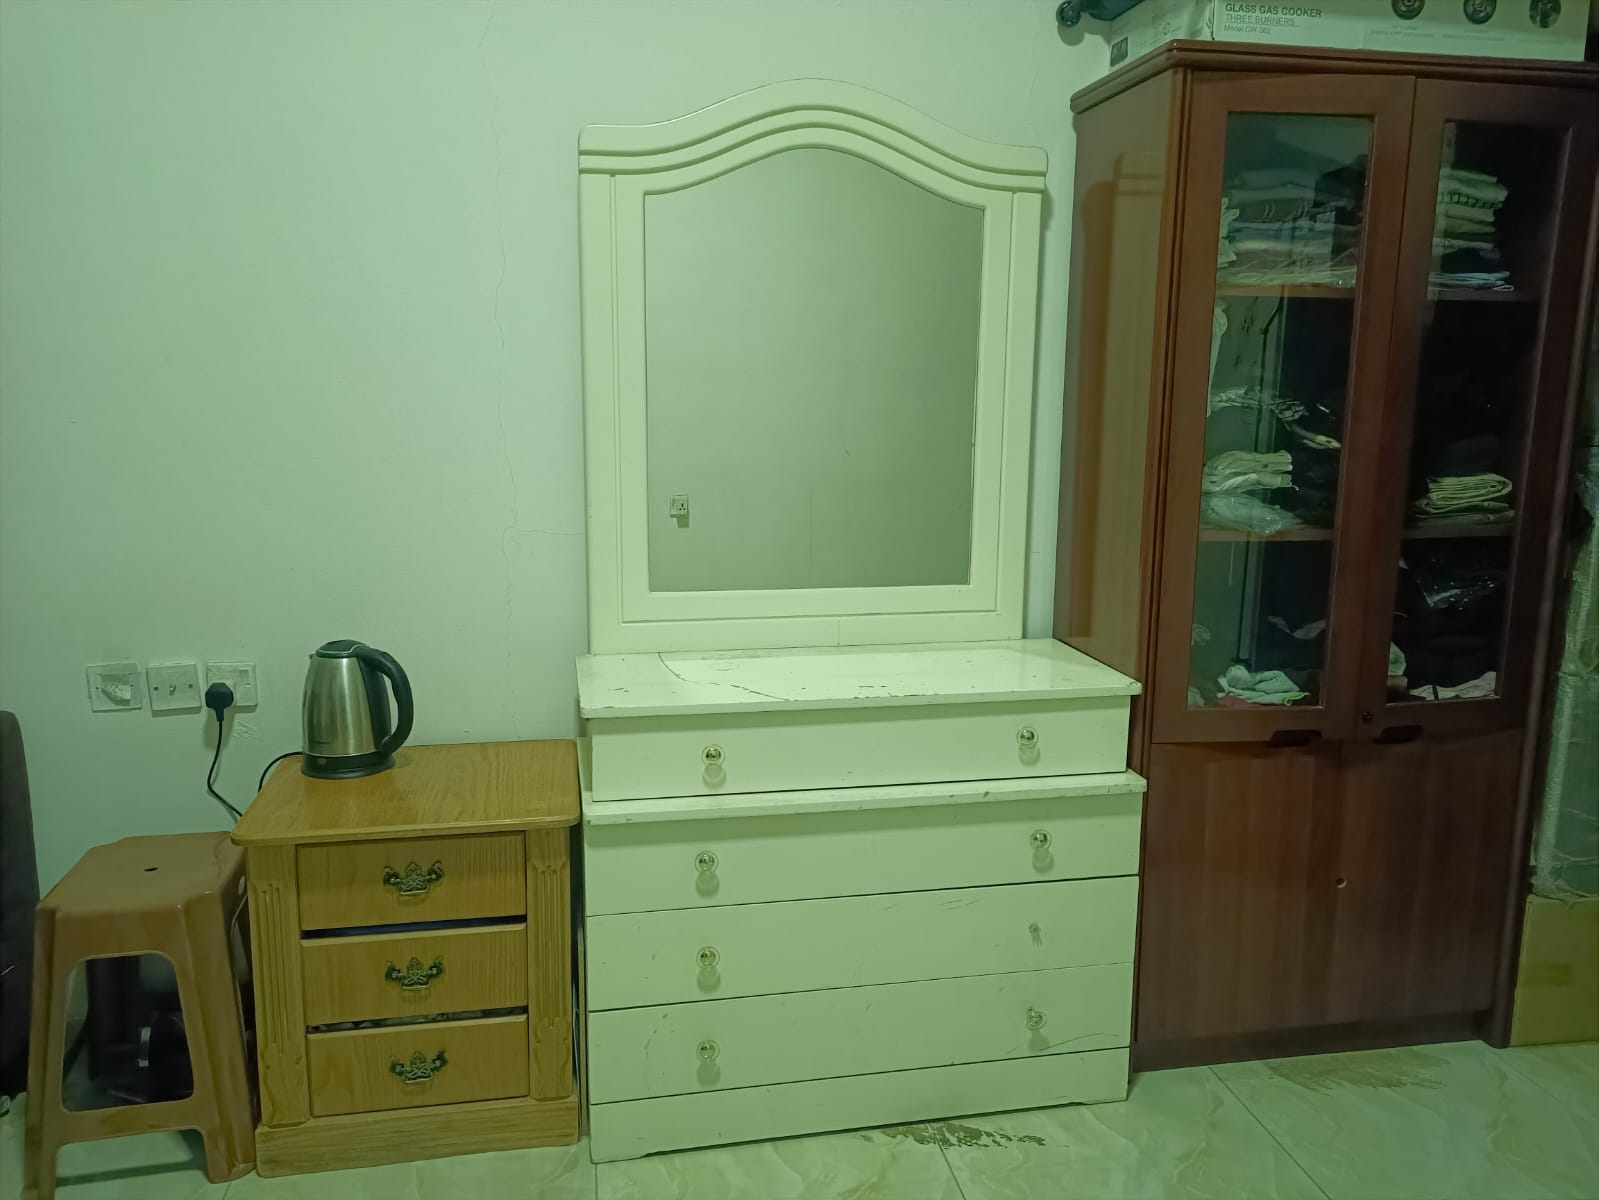 Big Hall- Studio Arartment for Rent along with Home Appliences & Furniture - Hawally